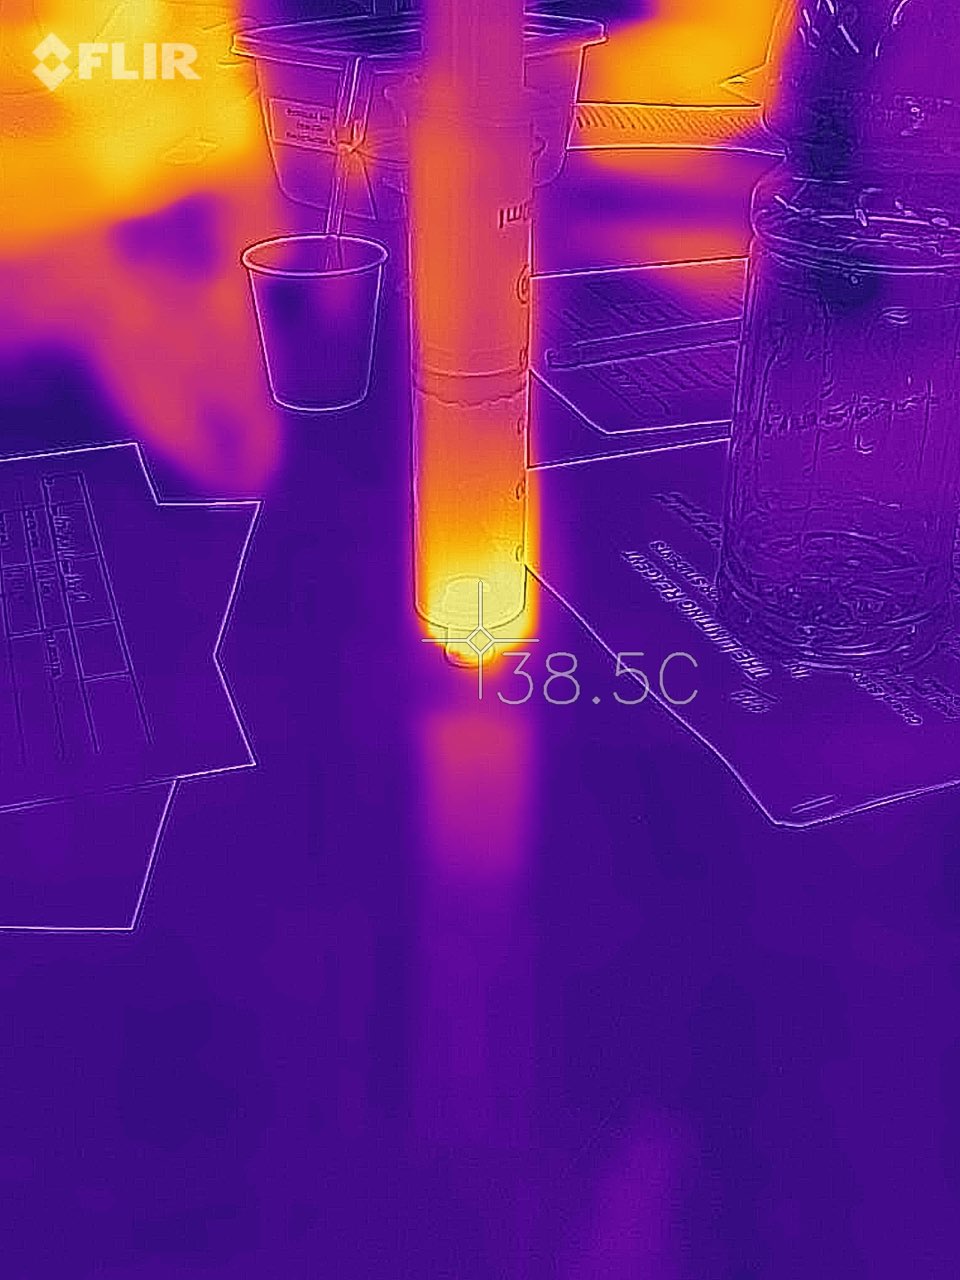 infrared image of gas collection process as reaction is taking place